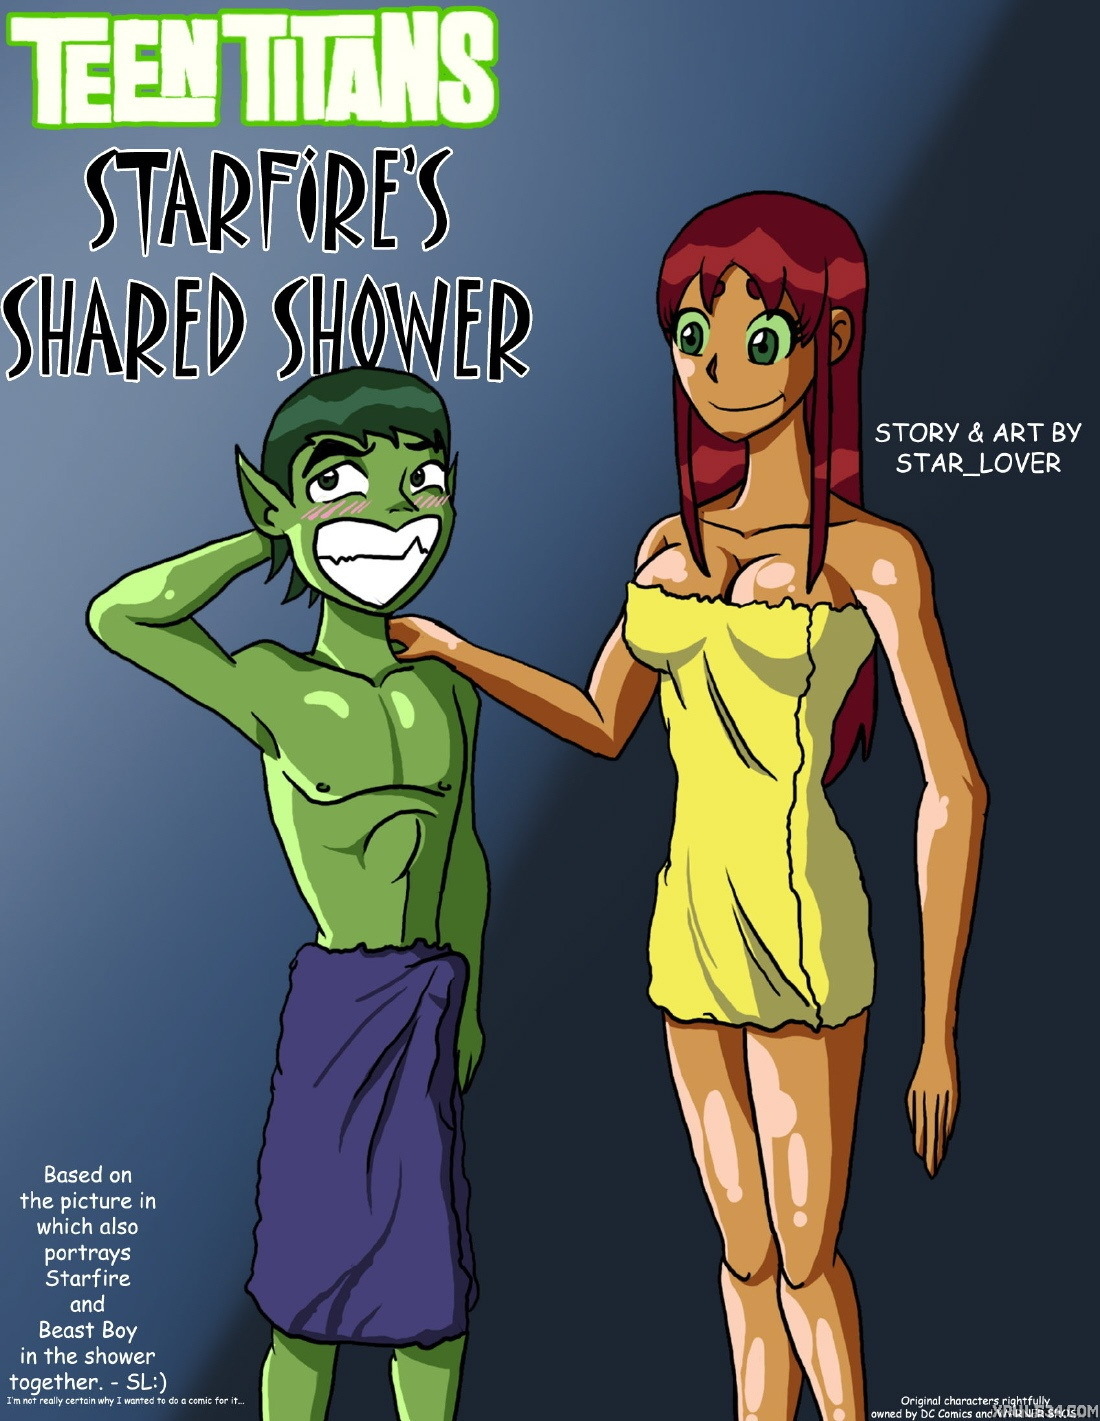 Starfire's Shared Shower - Page 1